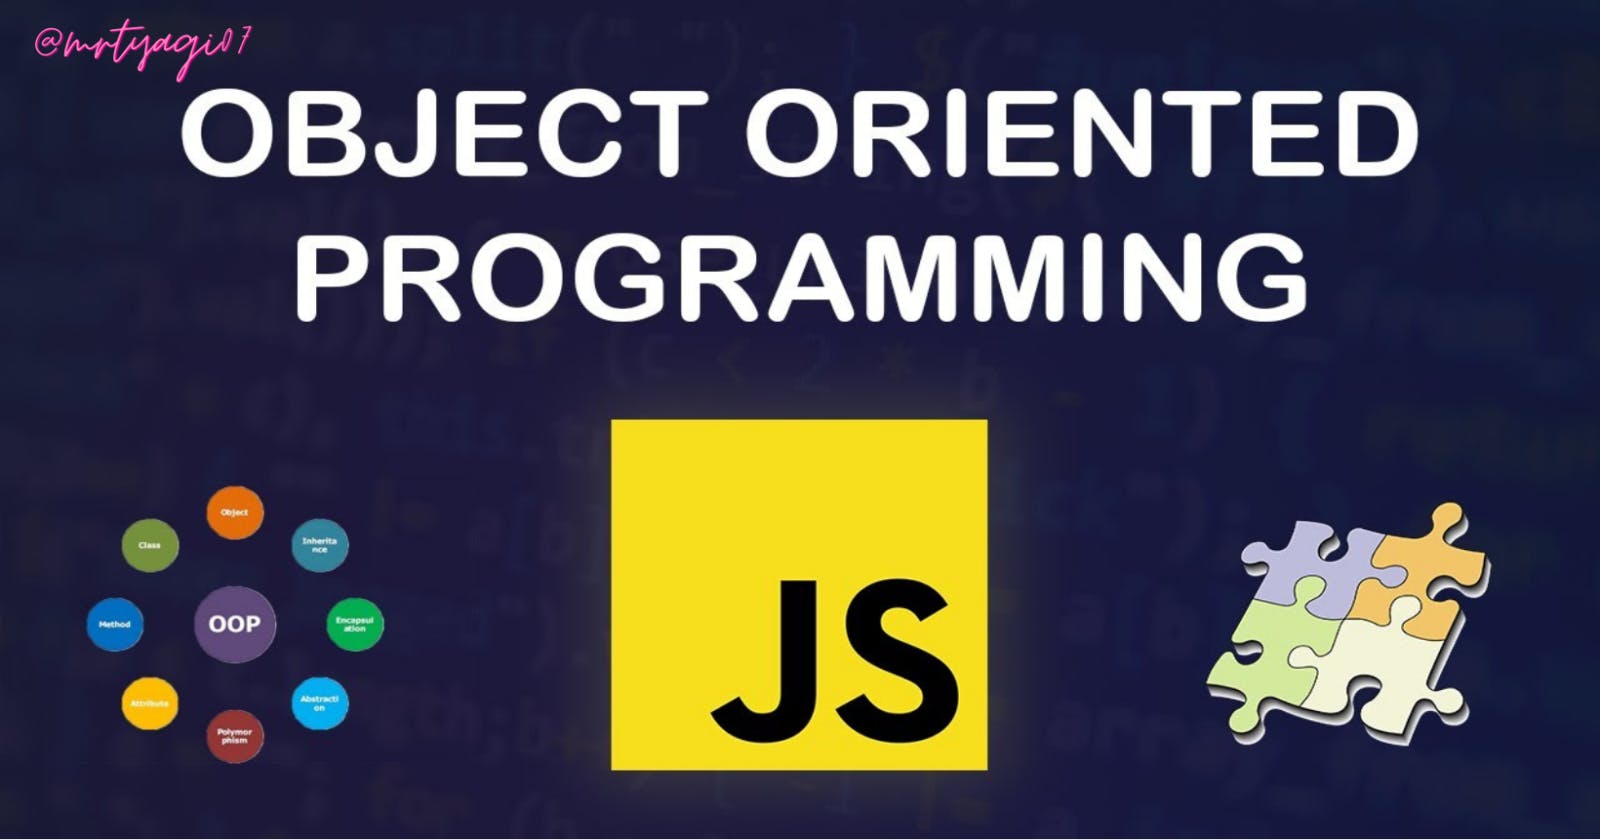 Object-oriented programming 
(OOP) With Javascript